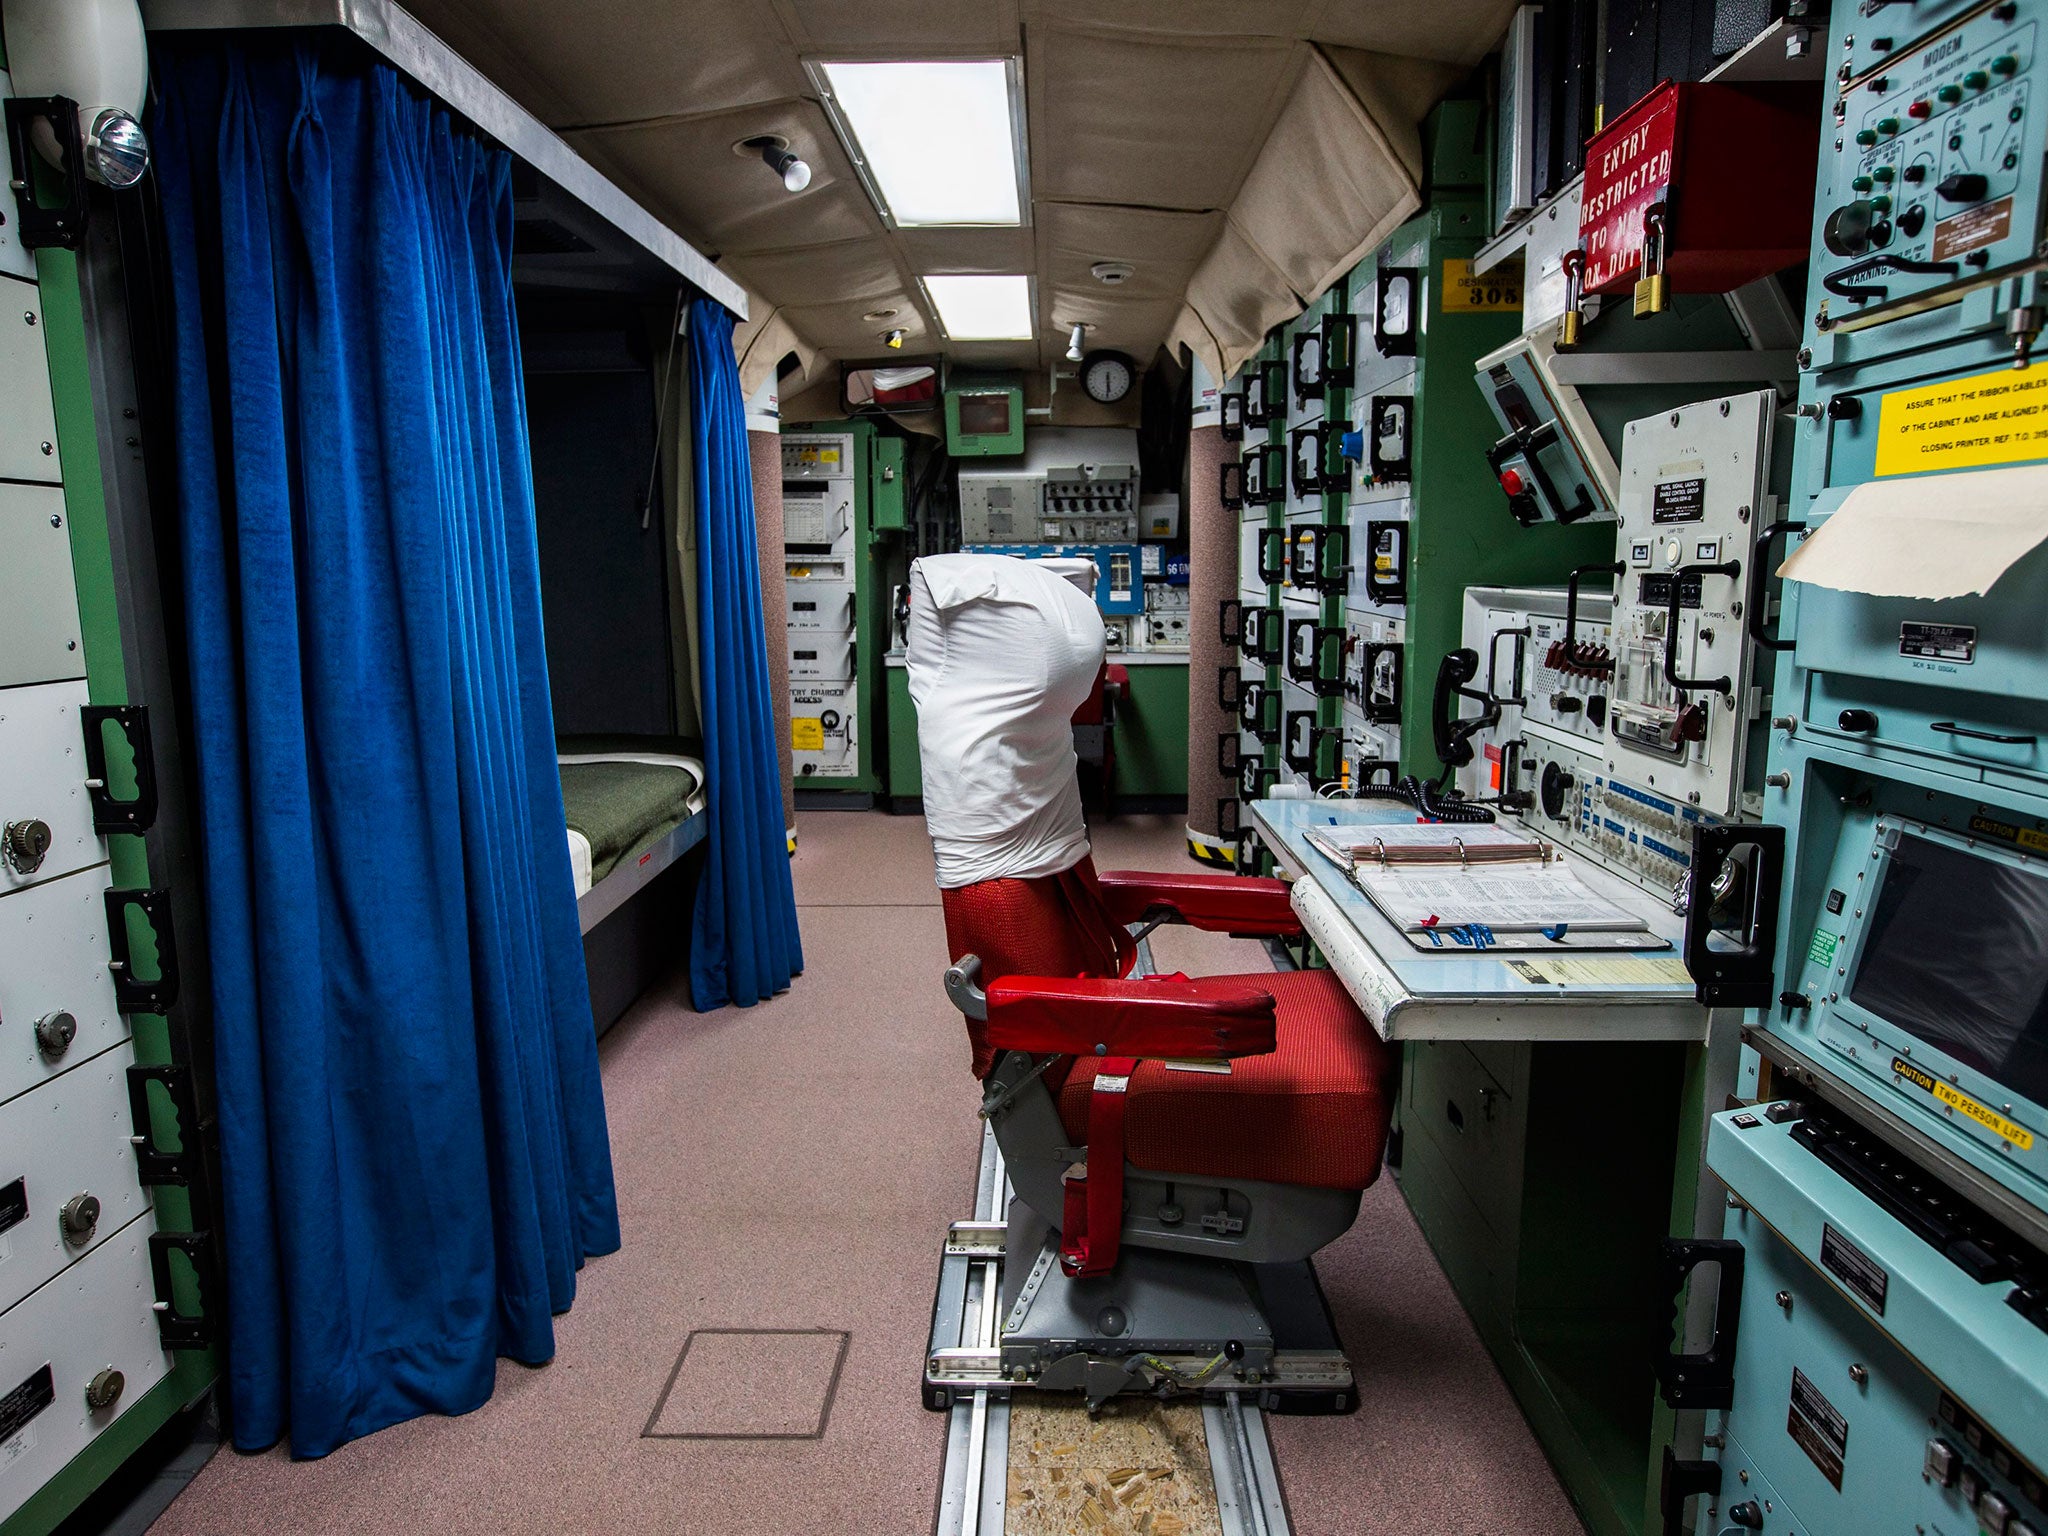 The assistant launch control officer's station is seen at the Delta 01-Launch Control Facility, the former control center of a Minuteman missile, just outside Wall, South Dakota